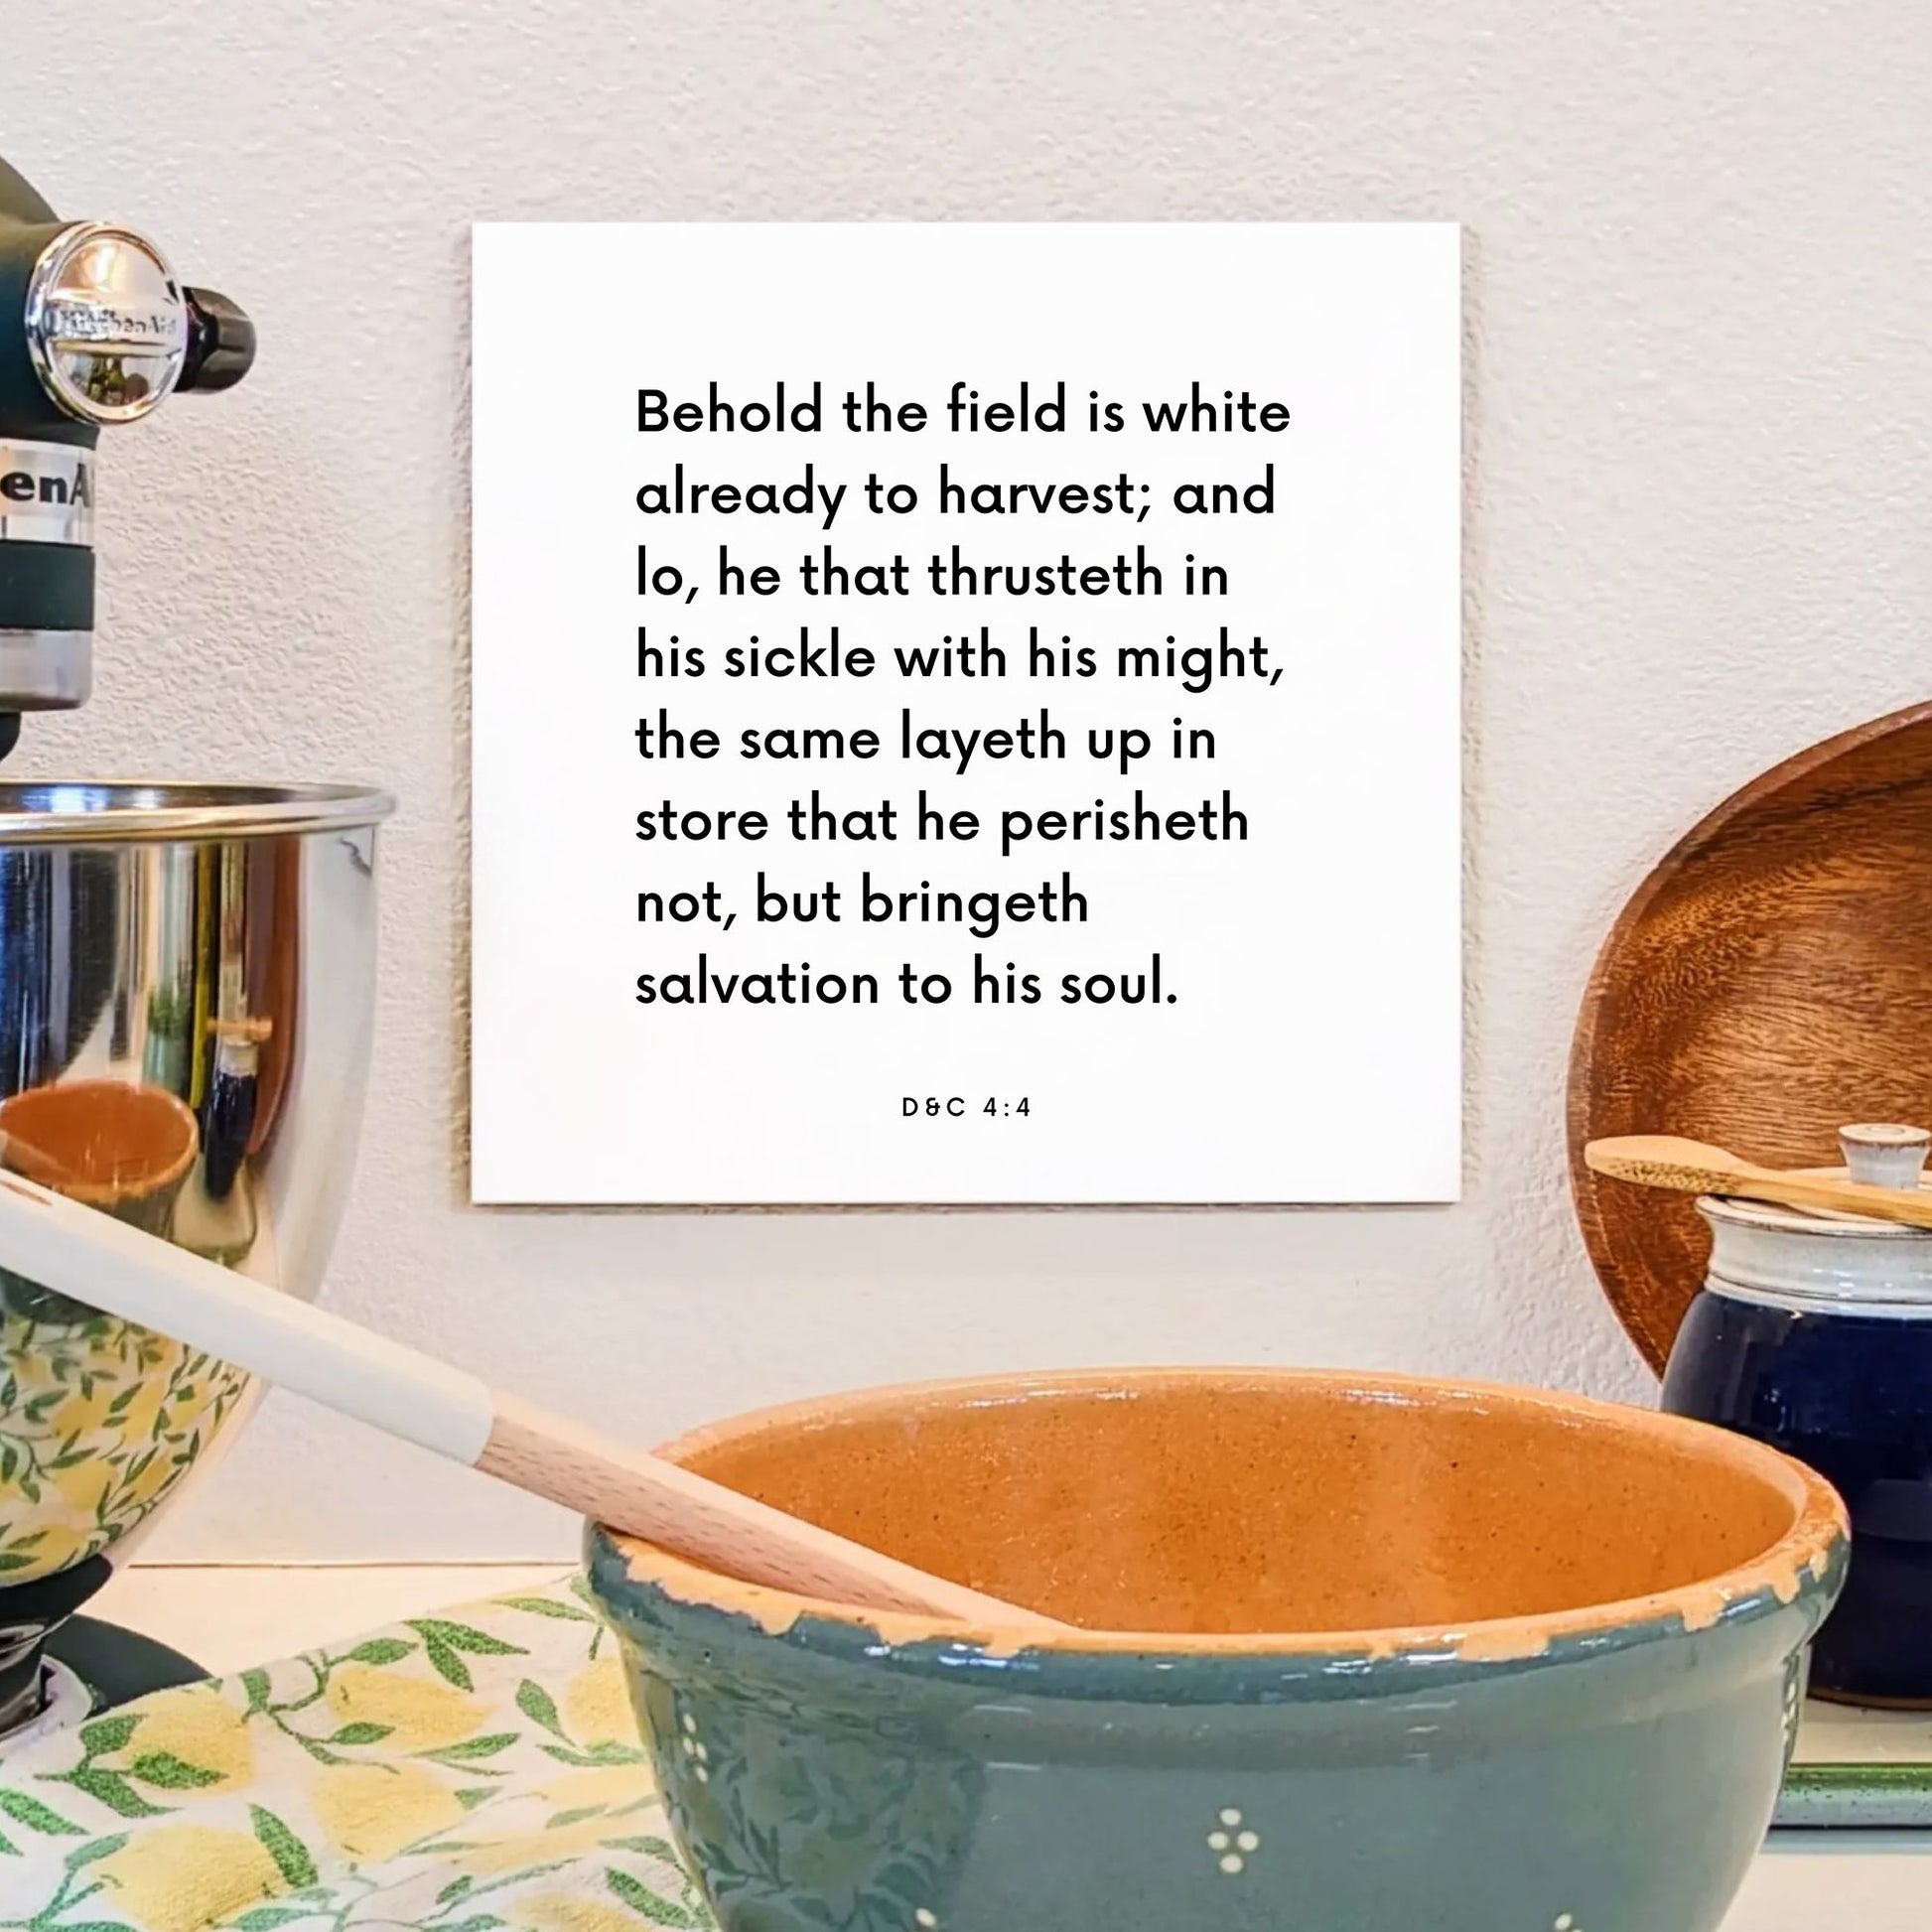 Kitchen mouting of the scripture tile for D&C 4:4 - "Behold the field is white already to harvest"